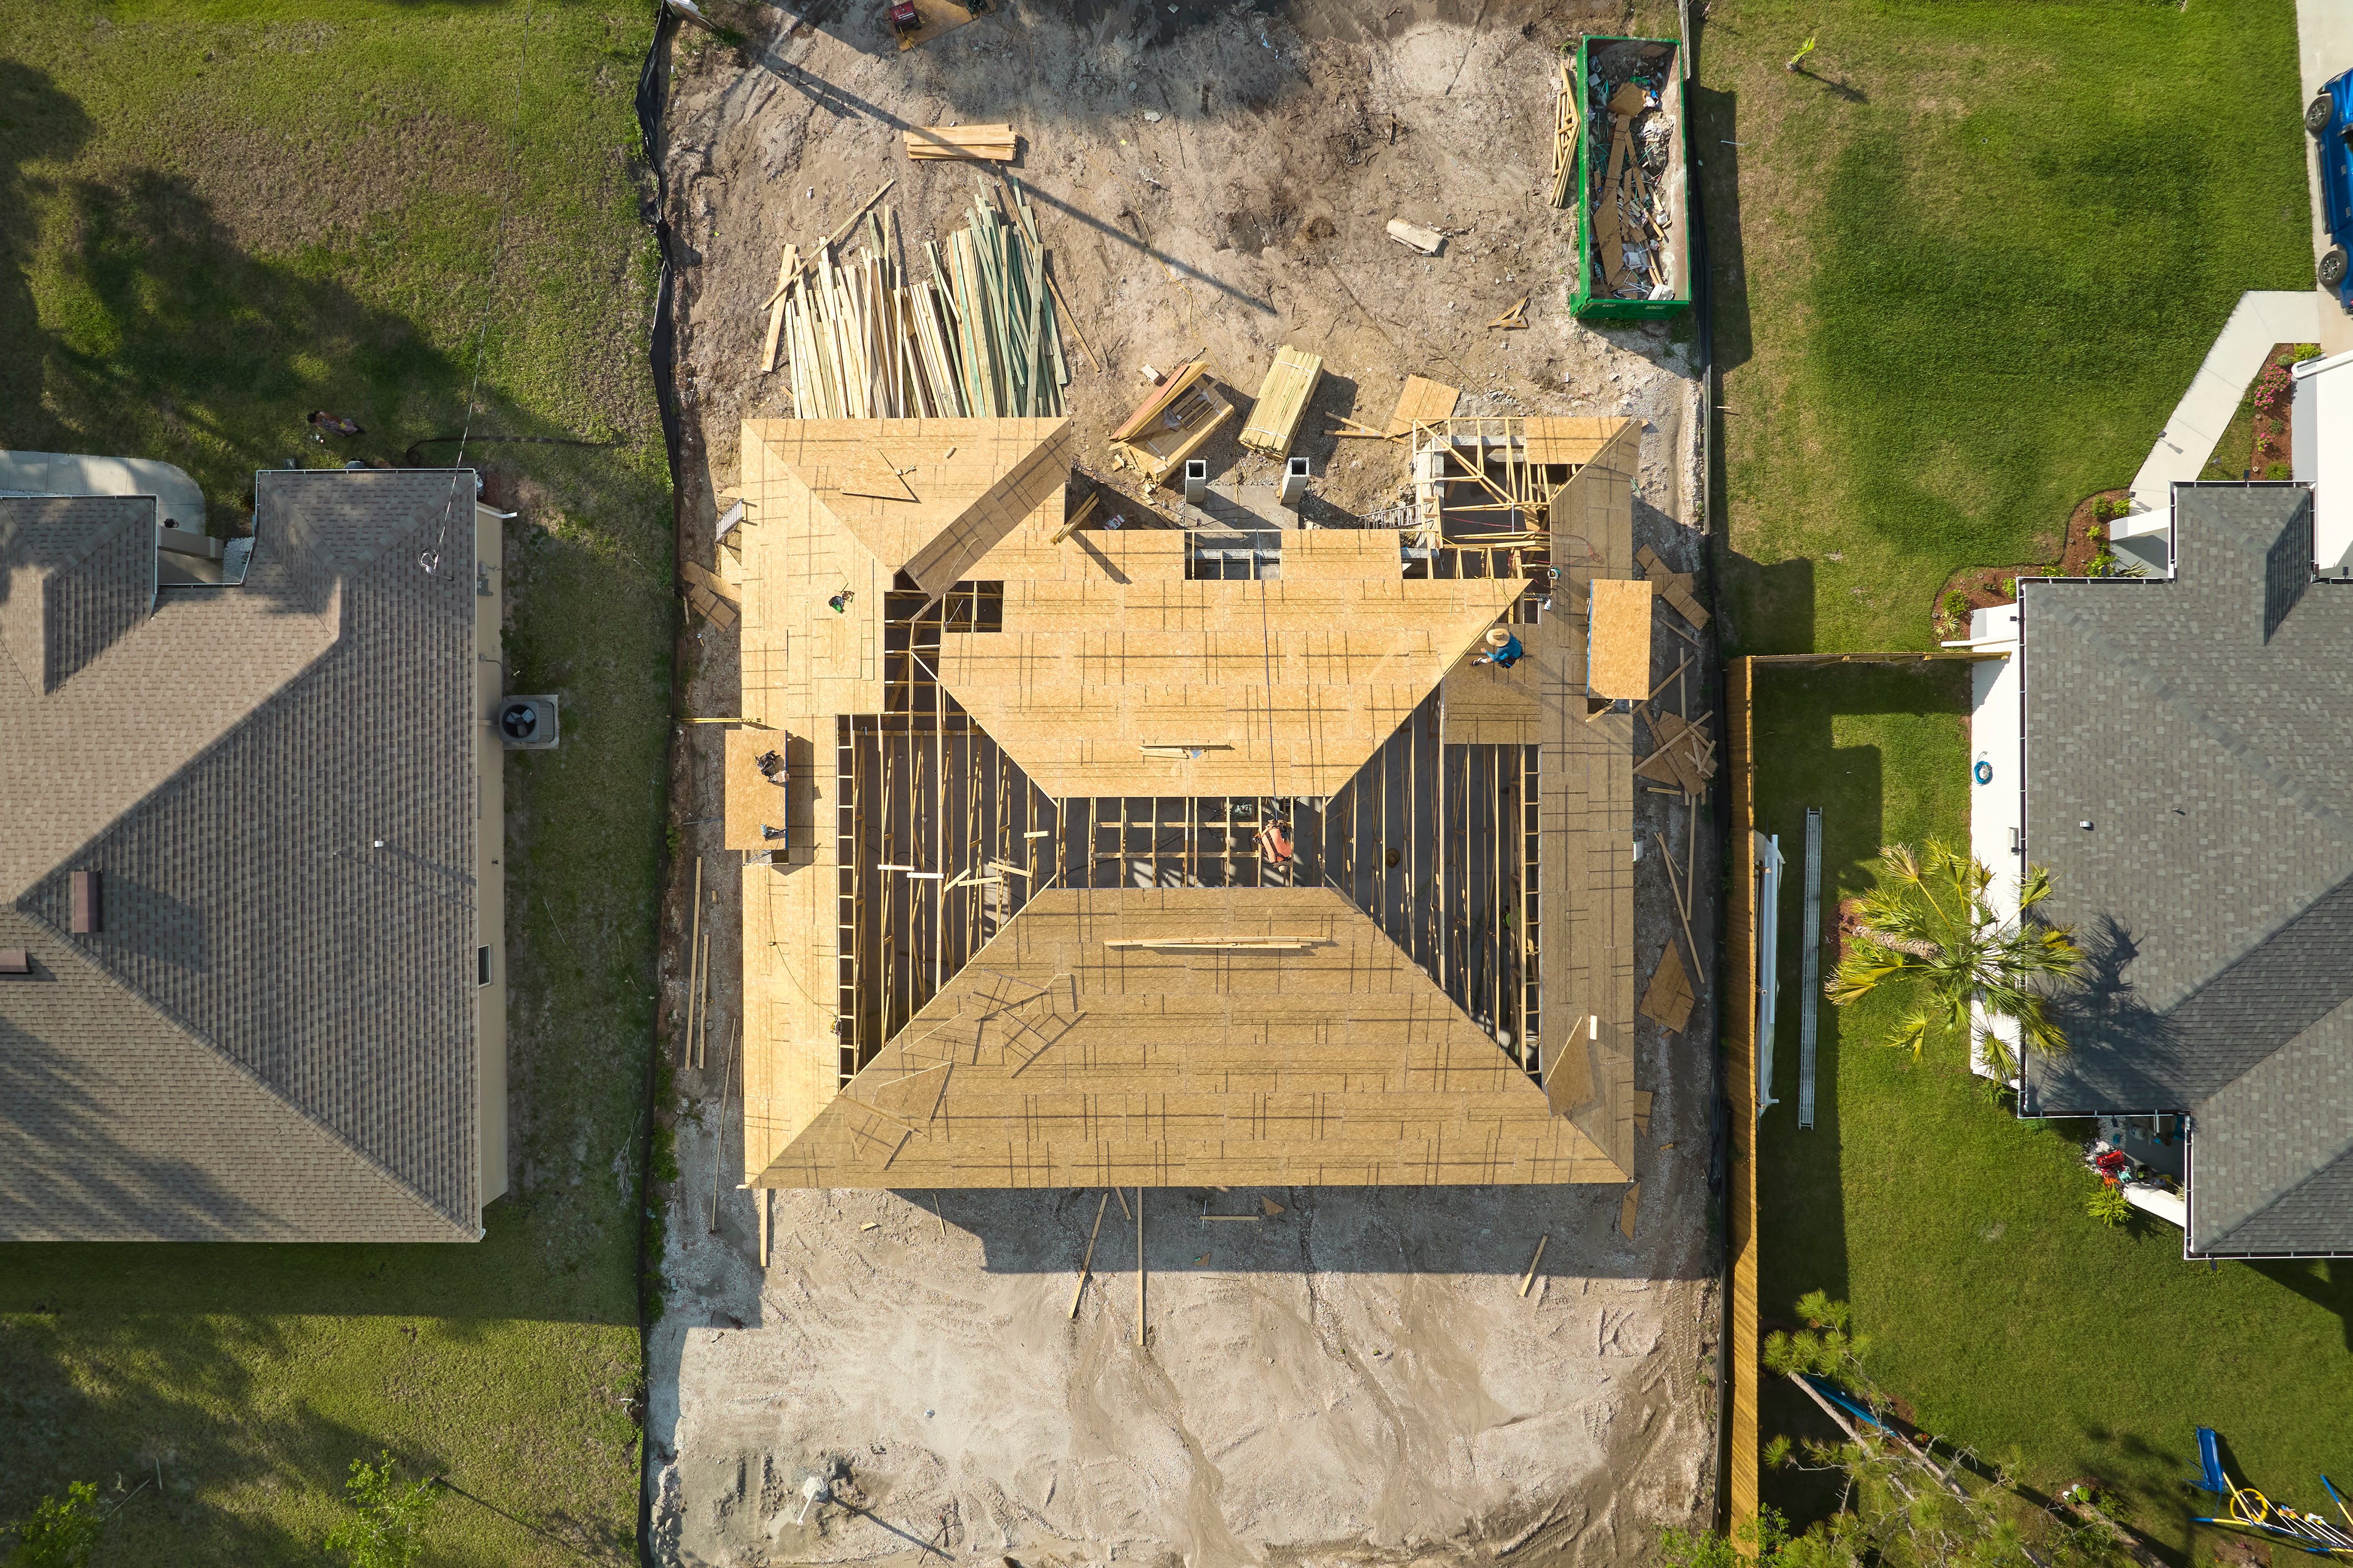 aerial-view-of-suburban-private-house-wit-wooden-r-2022-09-09-23-22-35-utc